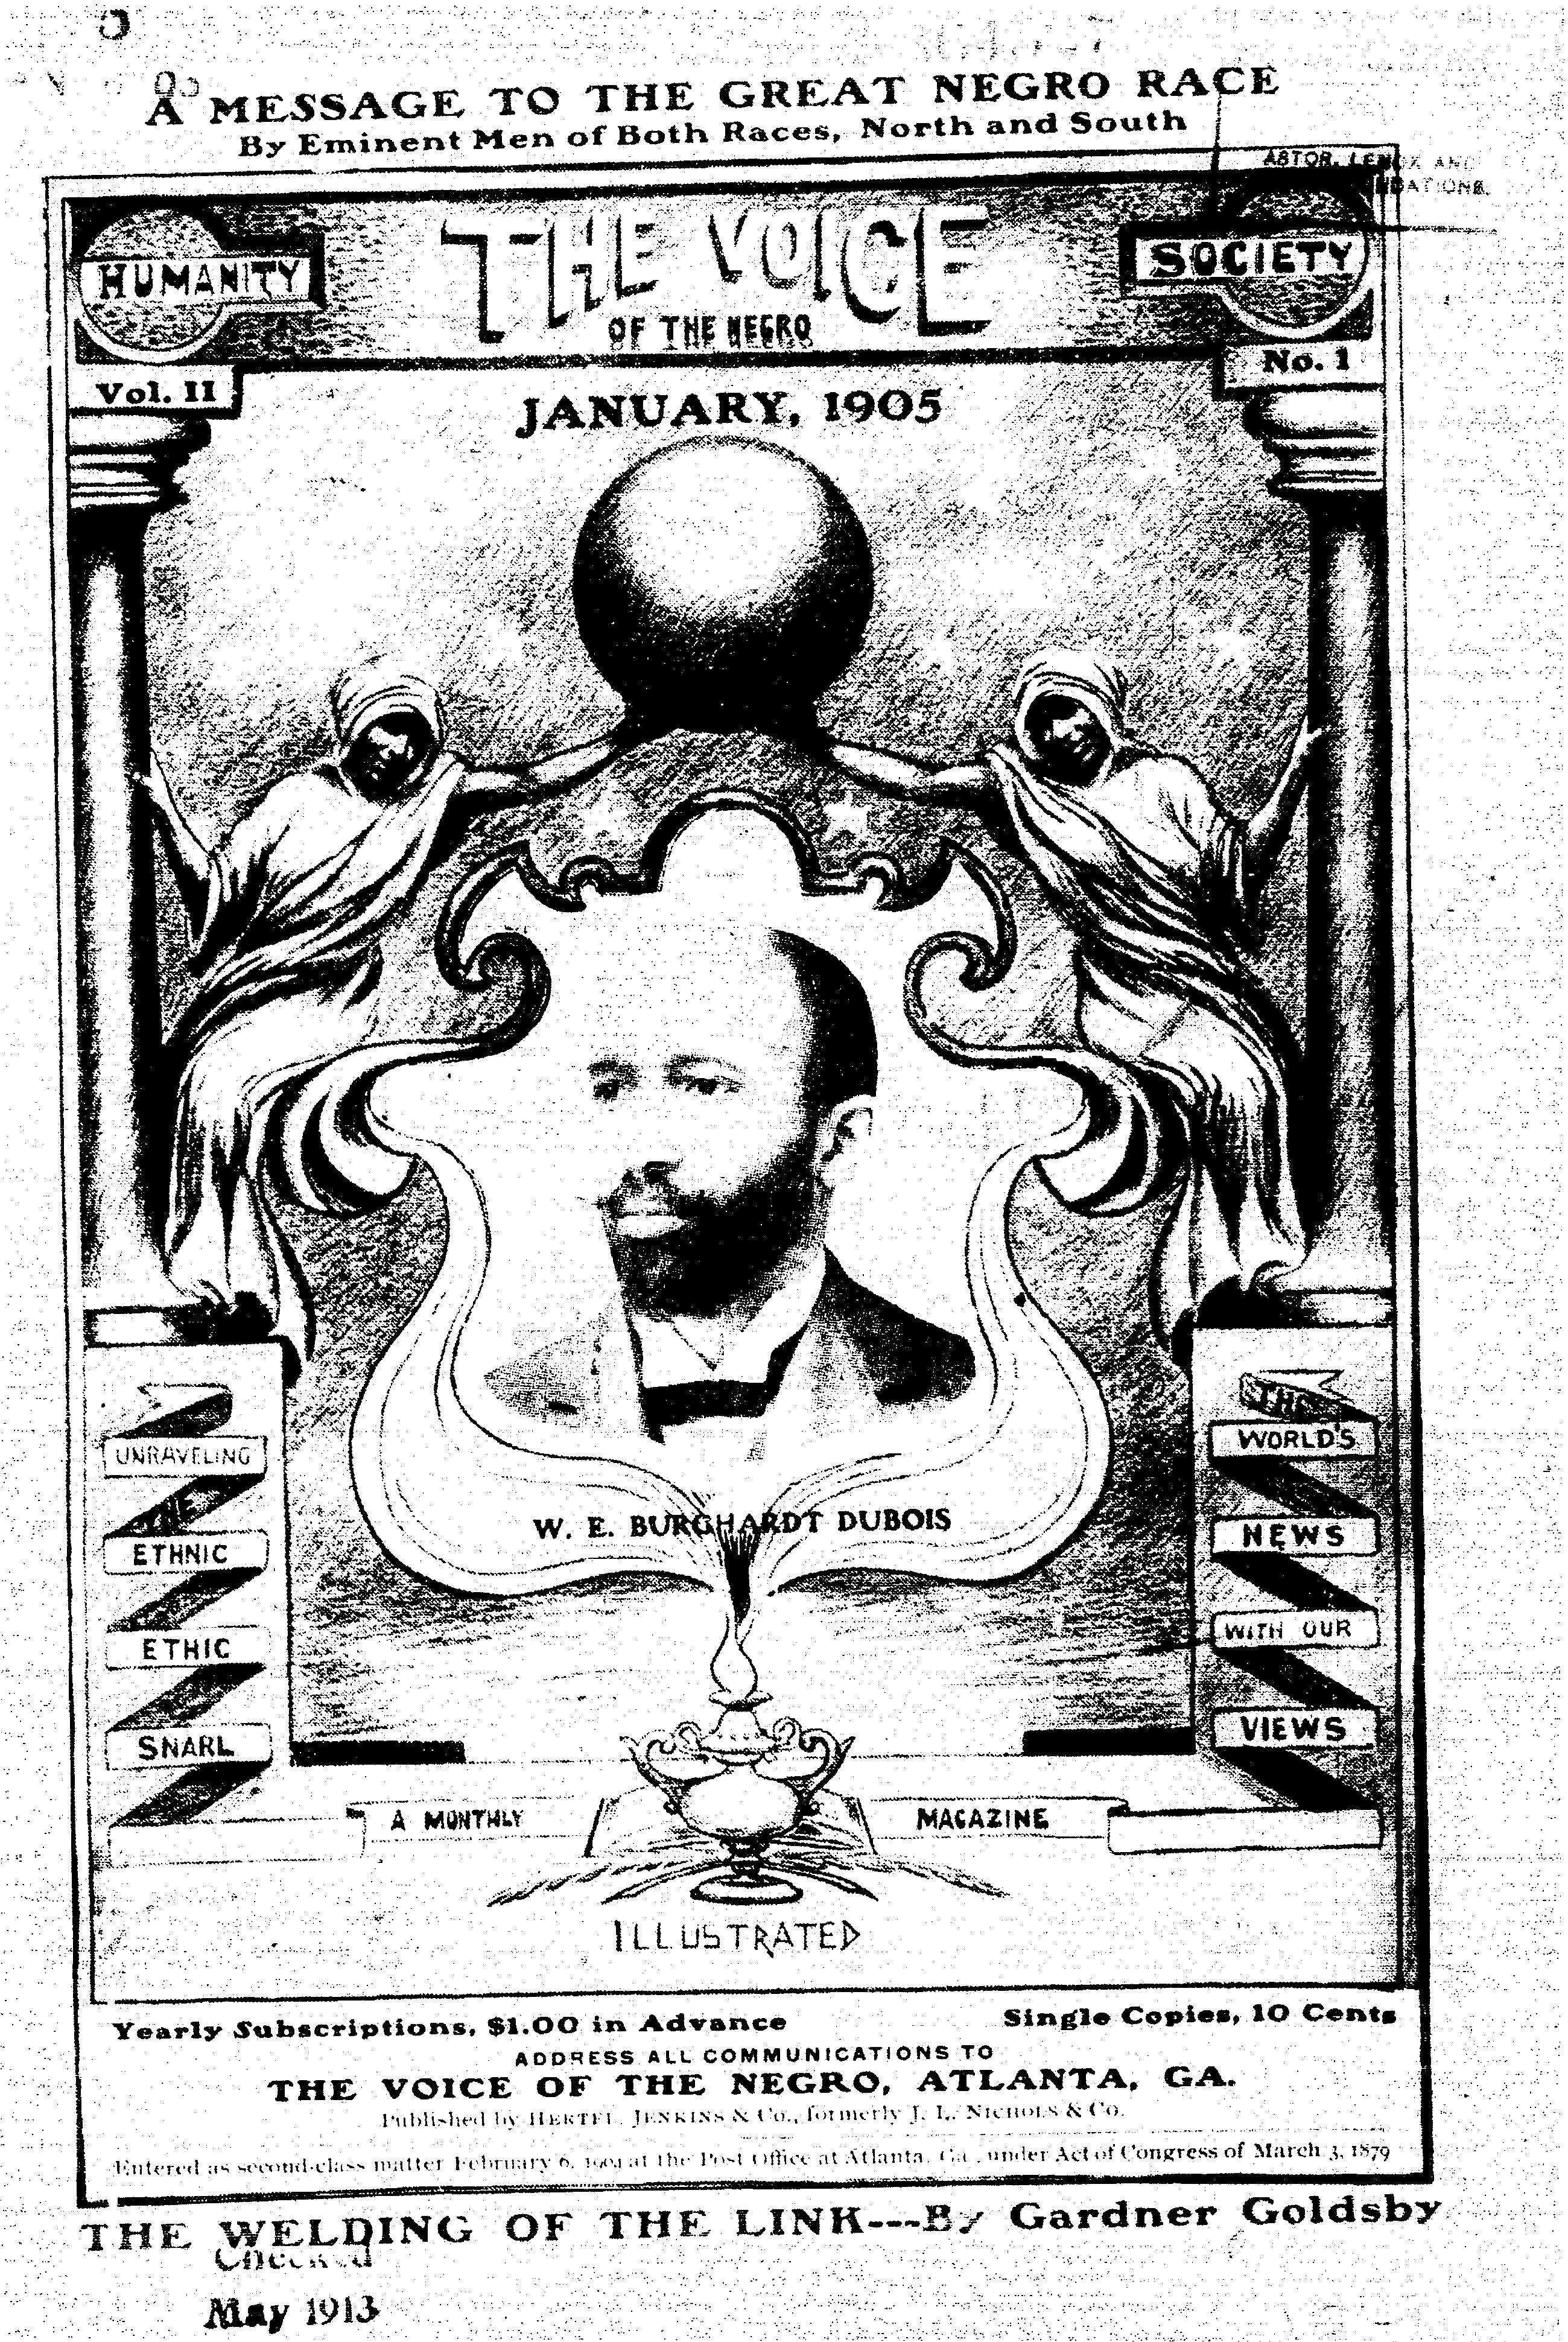 Image of The Voice of the Negro journal